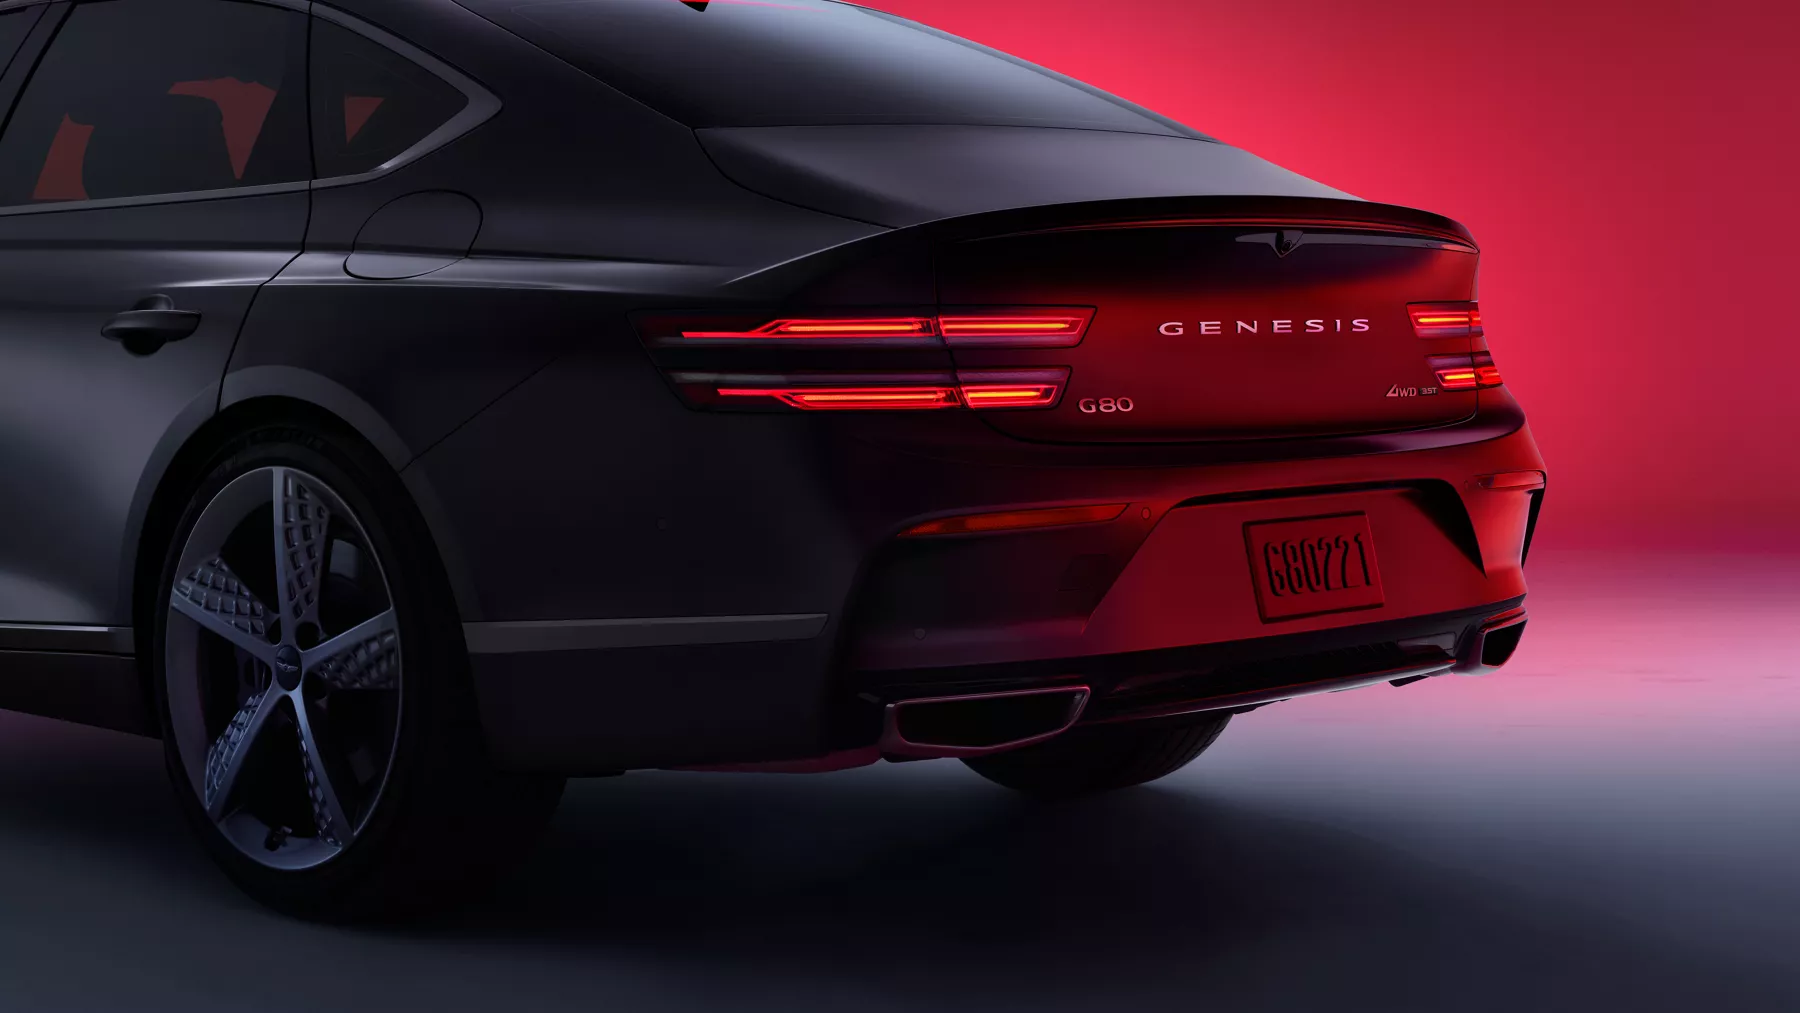 G80 rear tail lights and trunk parked in front of a red background.